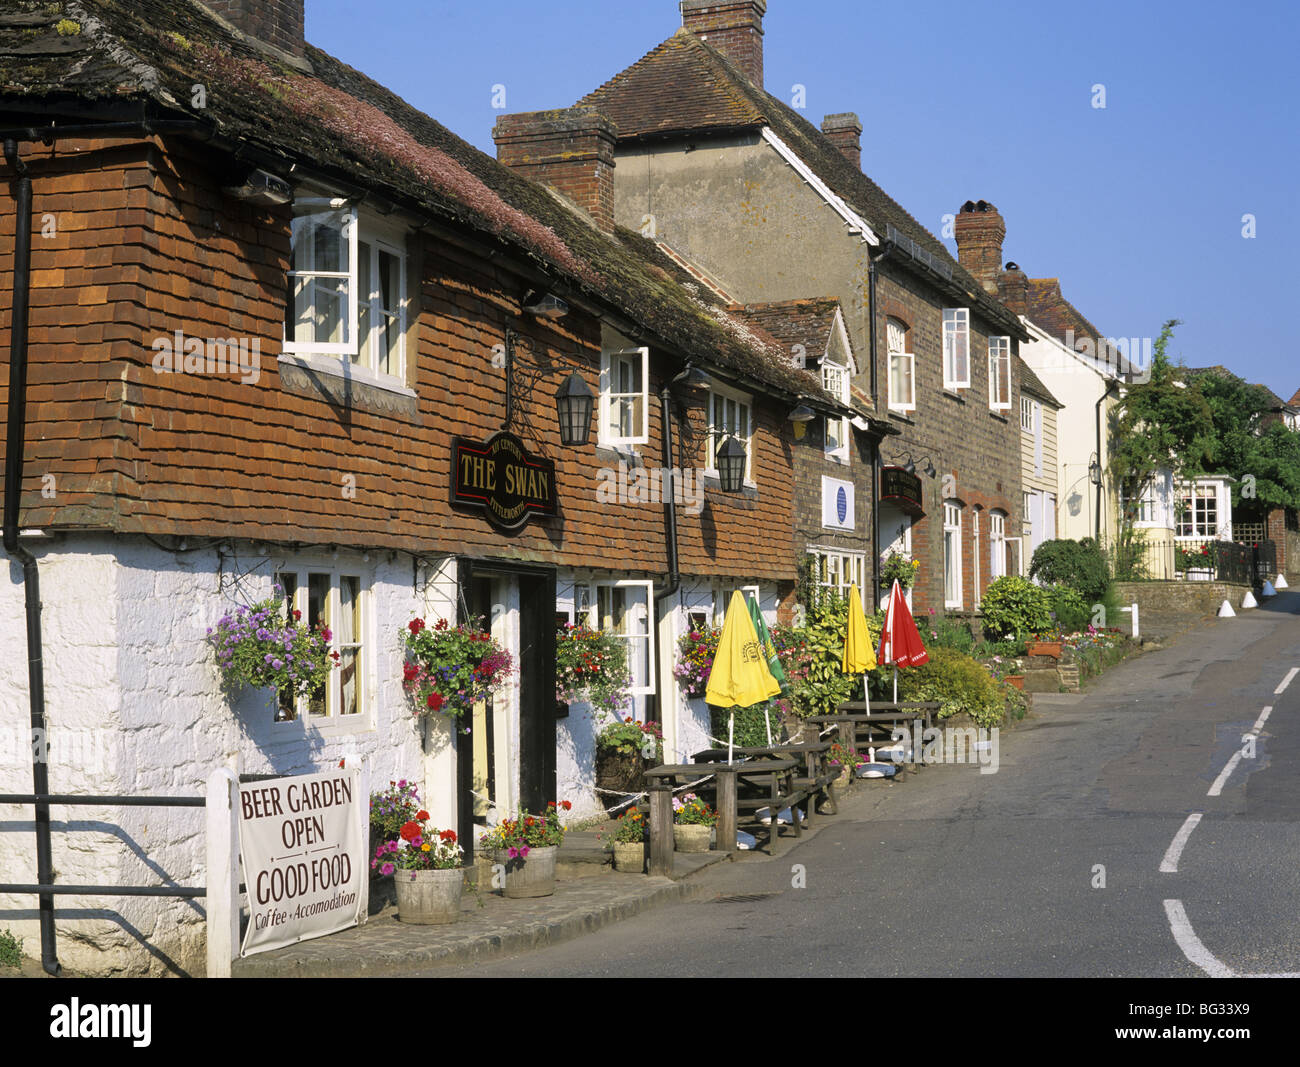 The Swan a 14th century roadside village Inn in Fittleworth West Sussex England UK Britain. Stock Photo